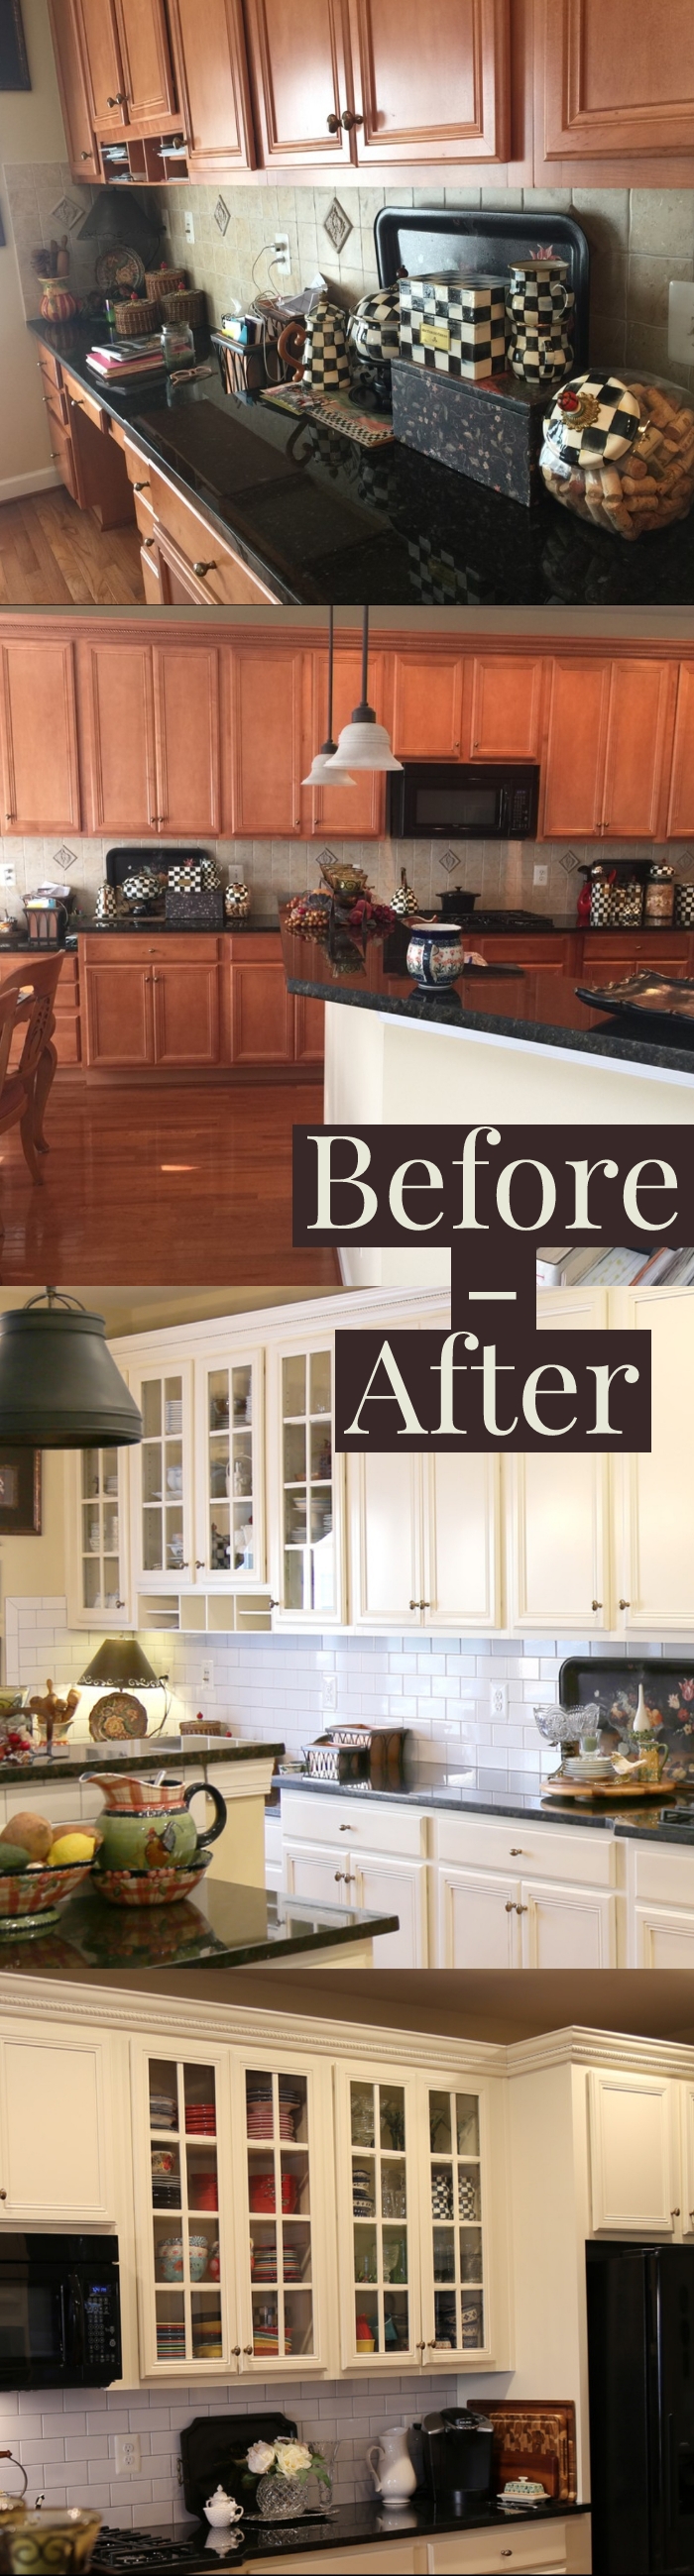 how to resurface kitchen cabinets yourself